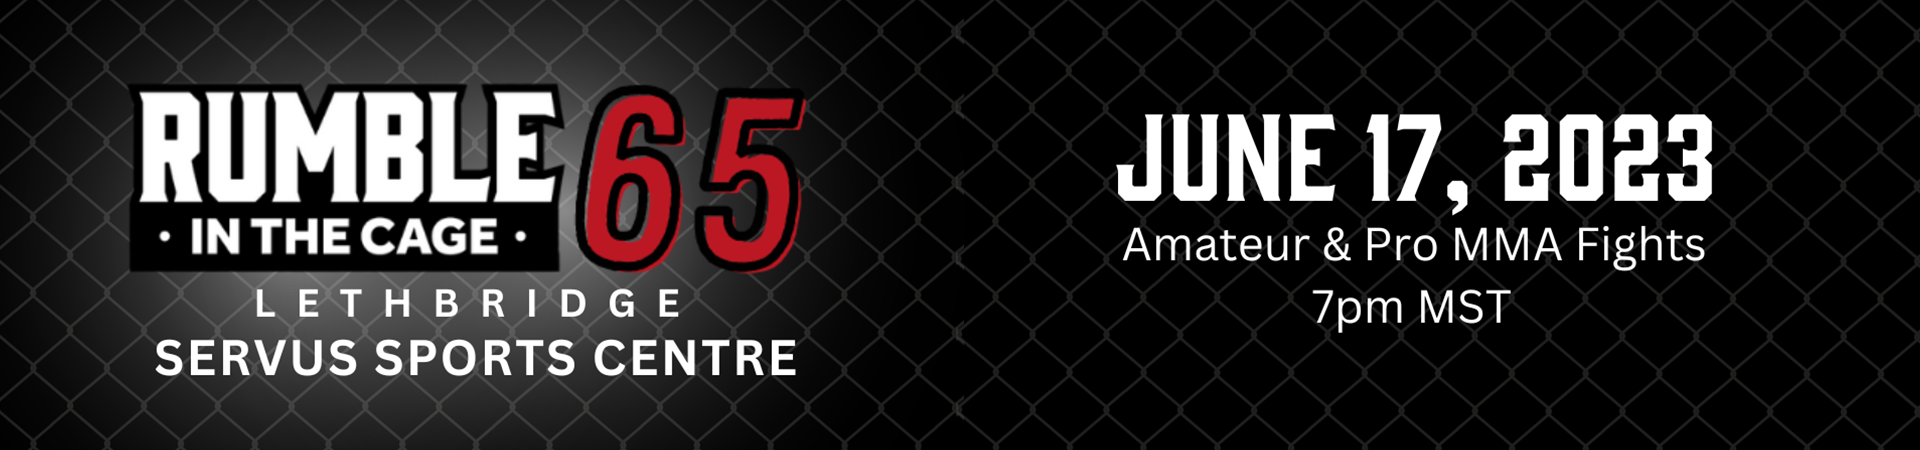 Rumble in the Cage 65